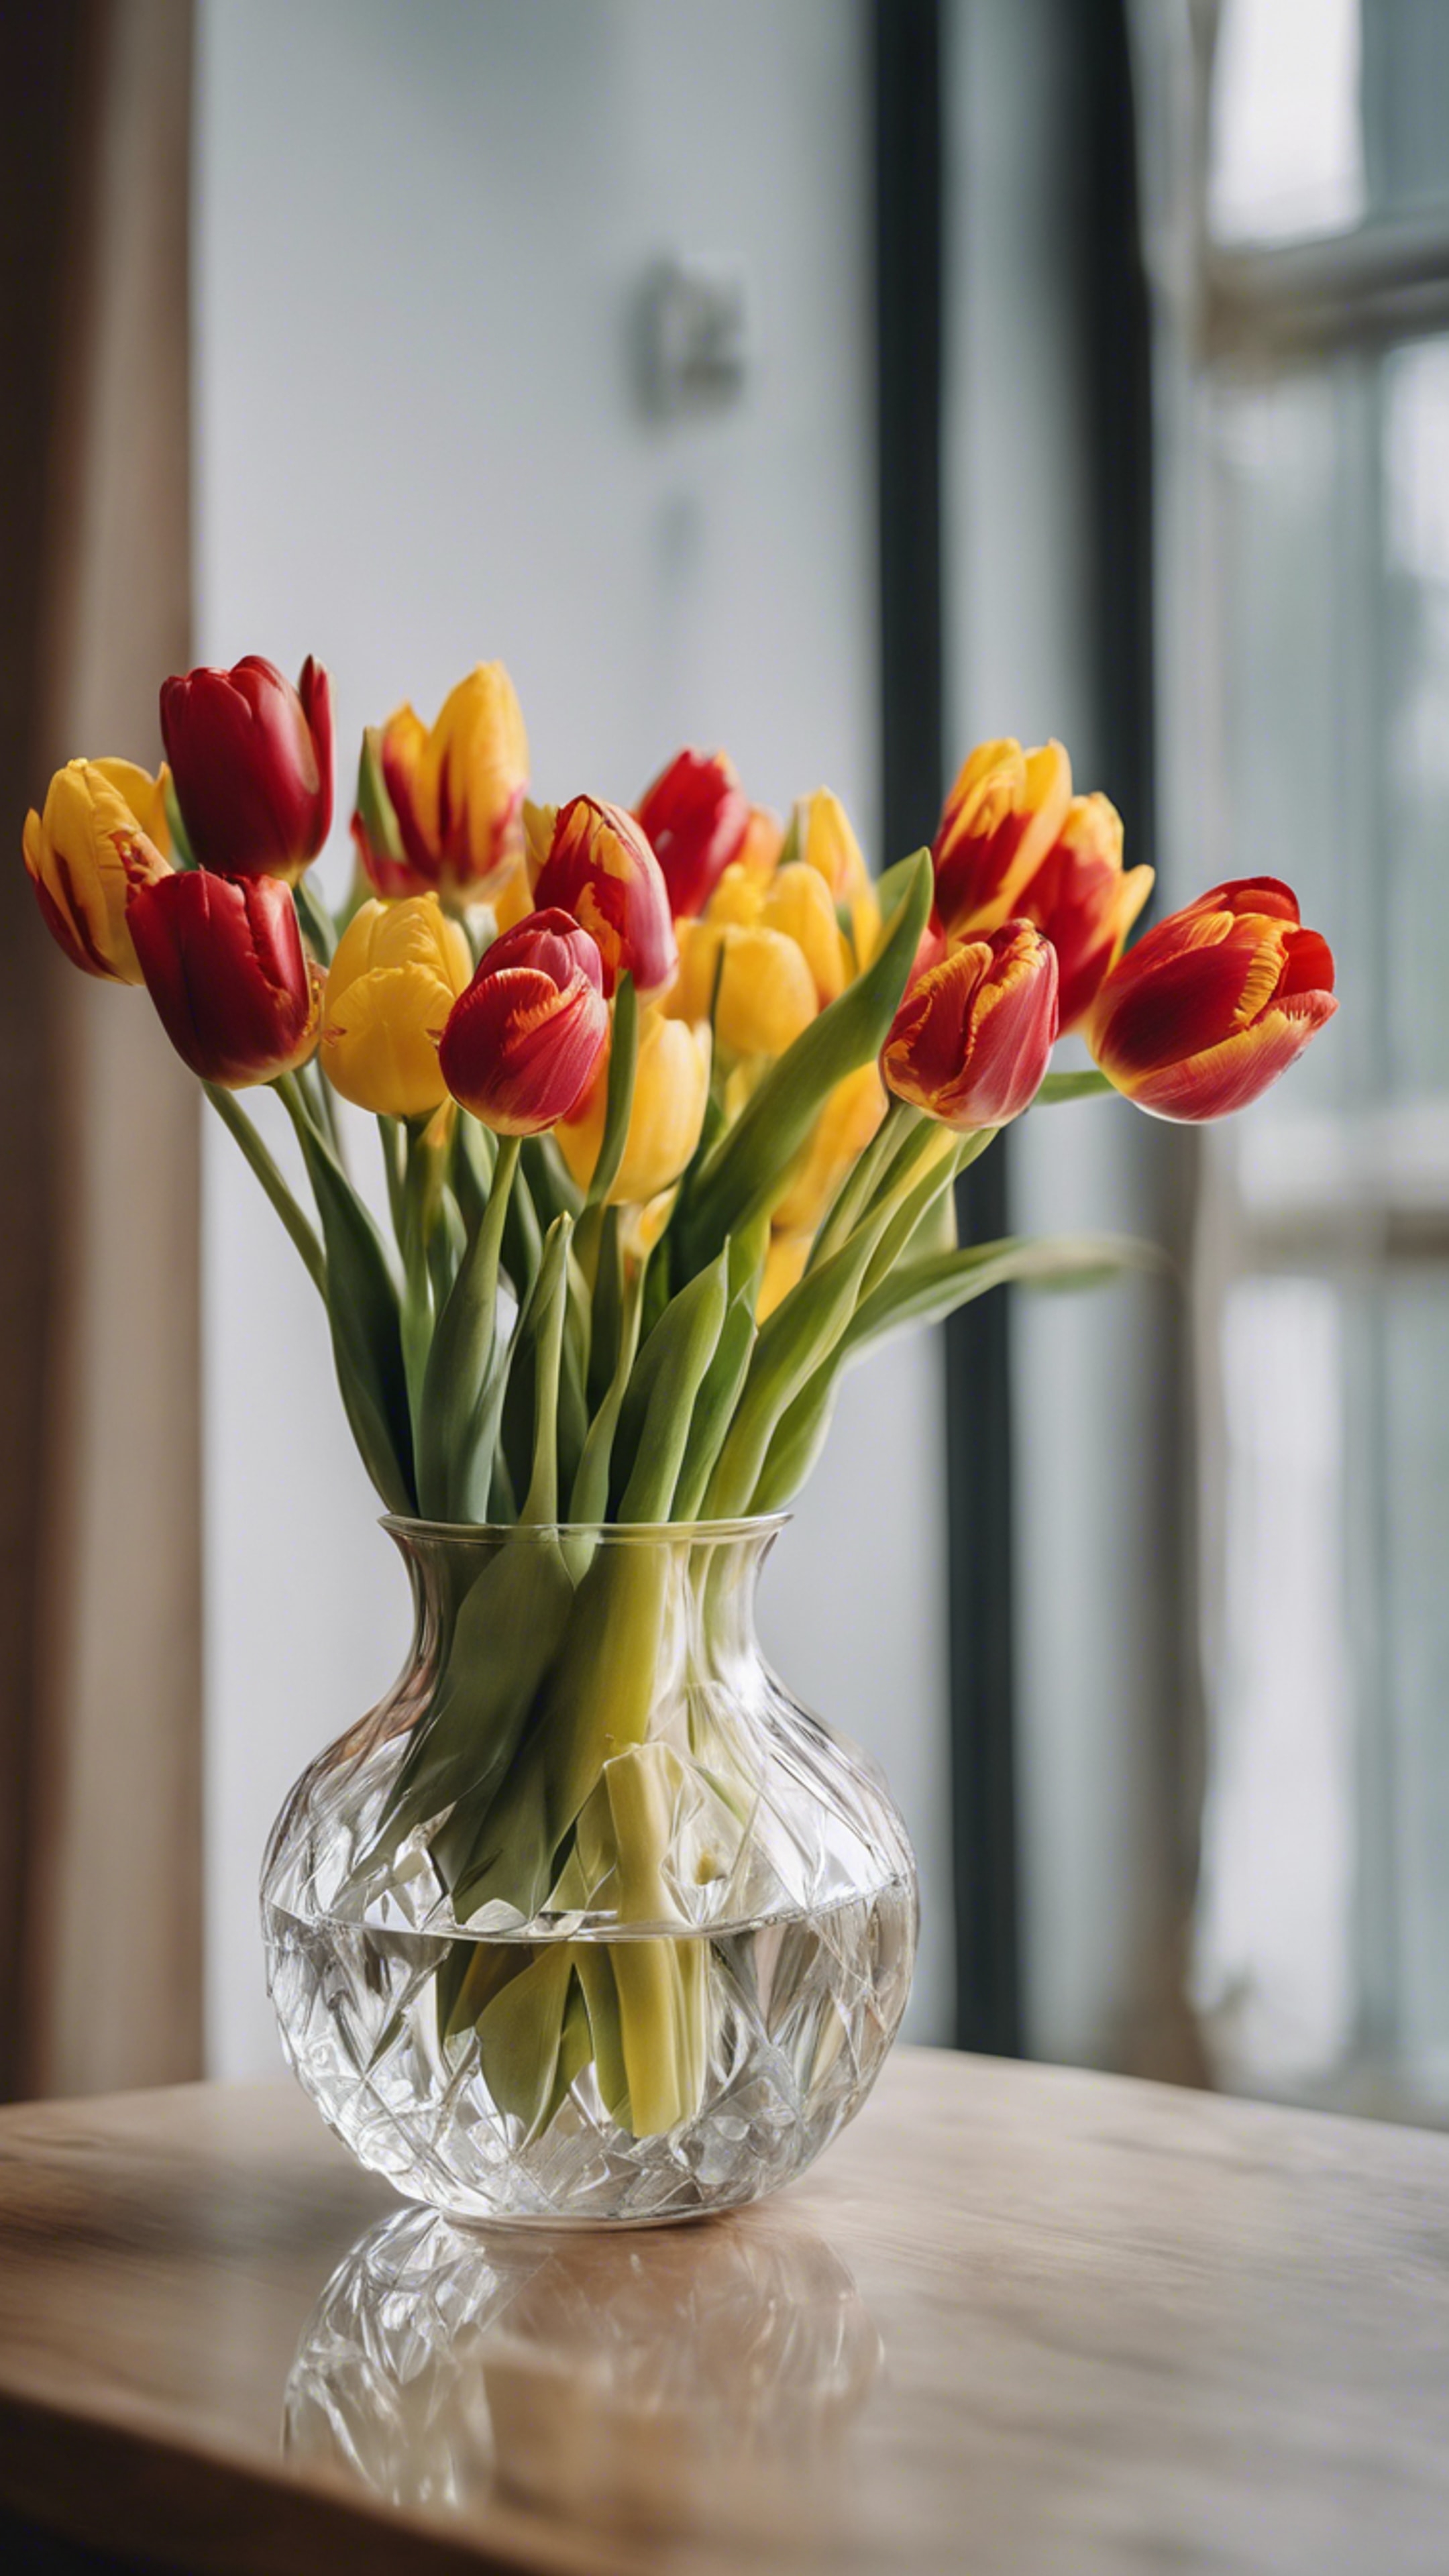 A bunch of fresh red and yellow tulips resting in a crystal clear vase. Tapeta[770eab0b3cc545c1af9b]